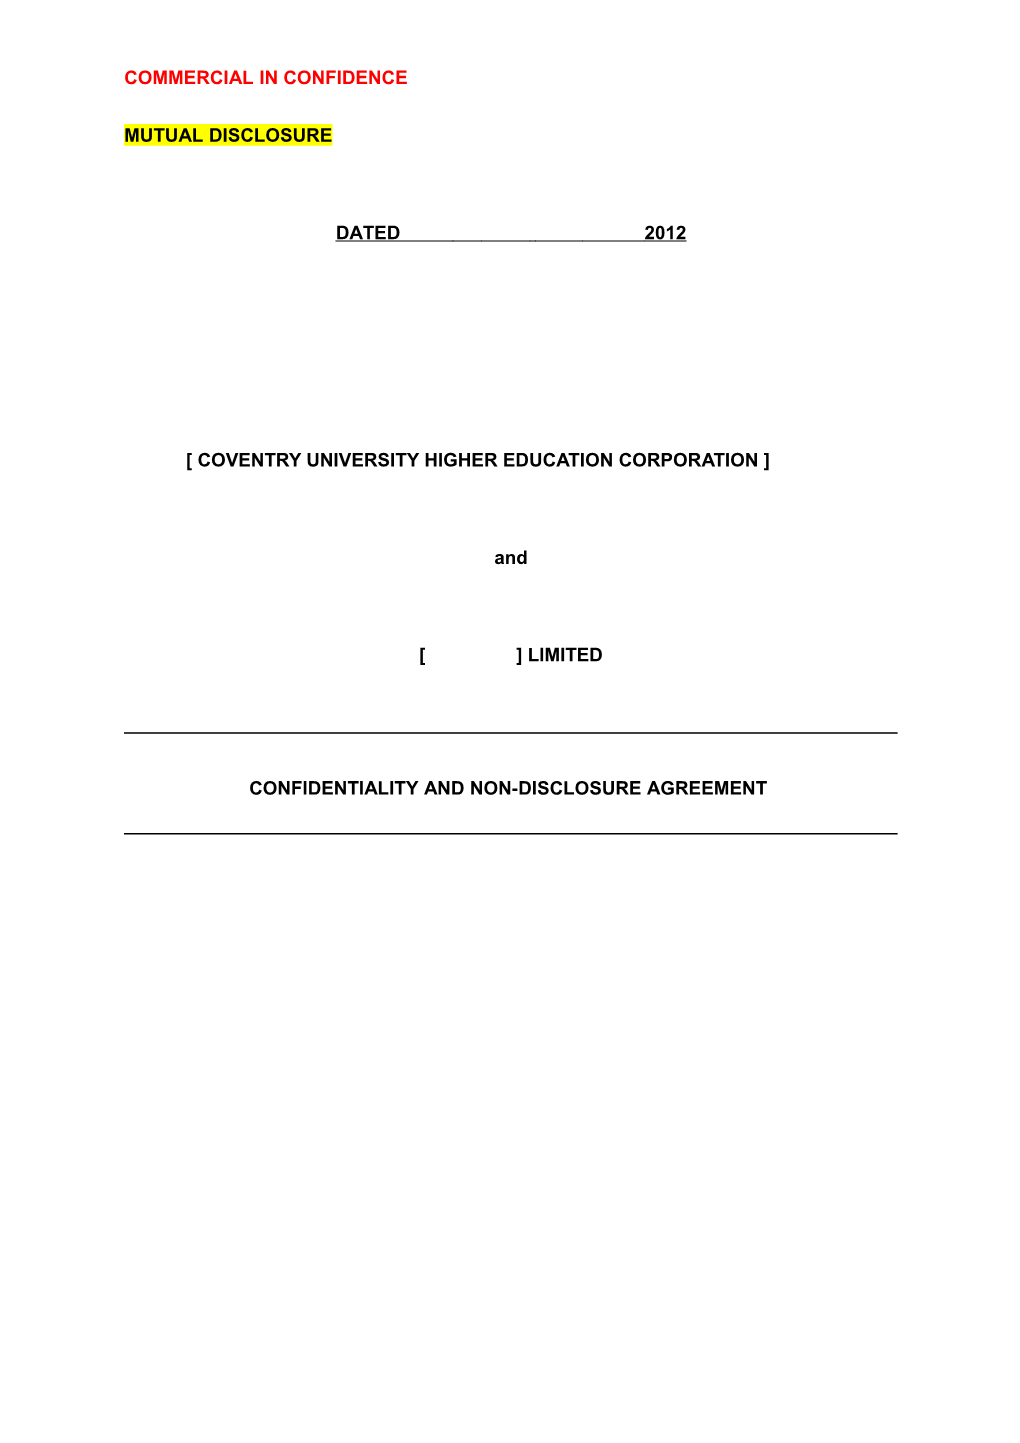 Confidentiality Agreement (Mutual)